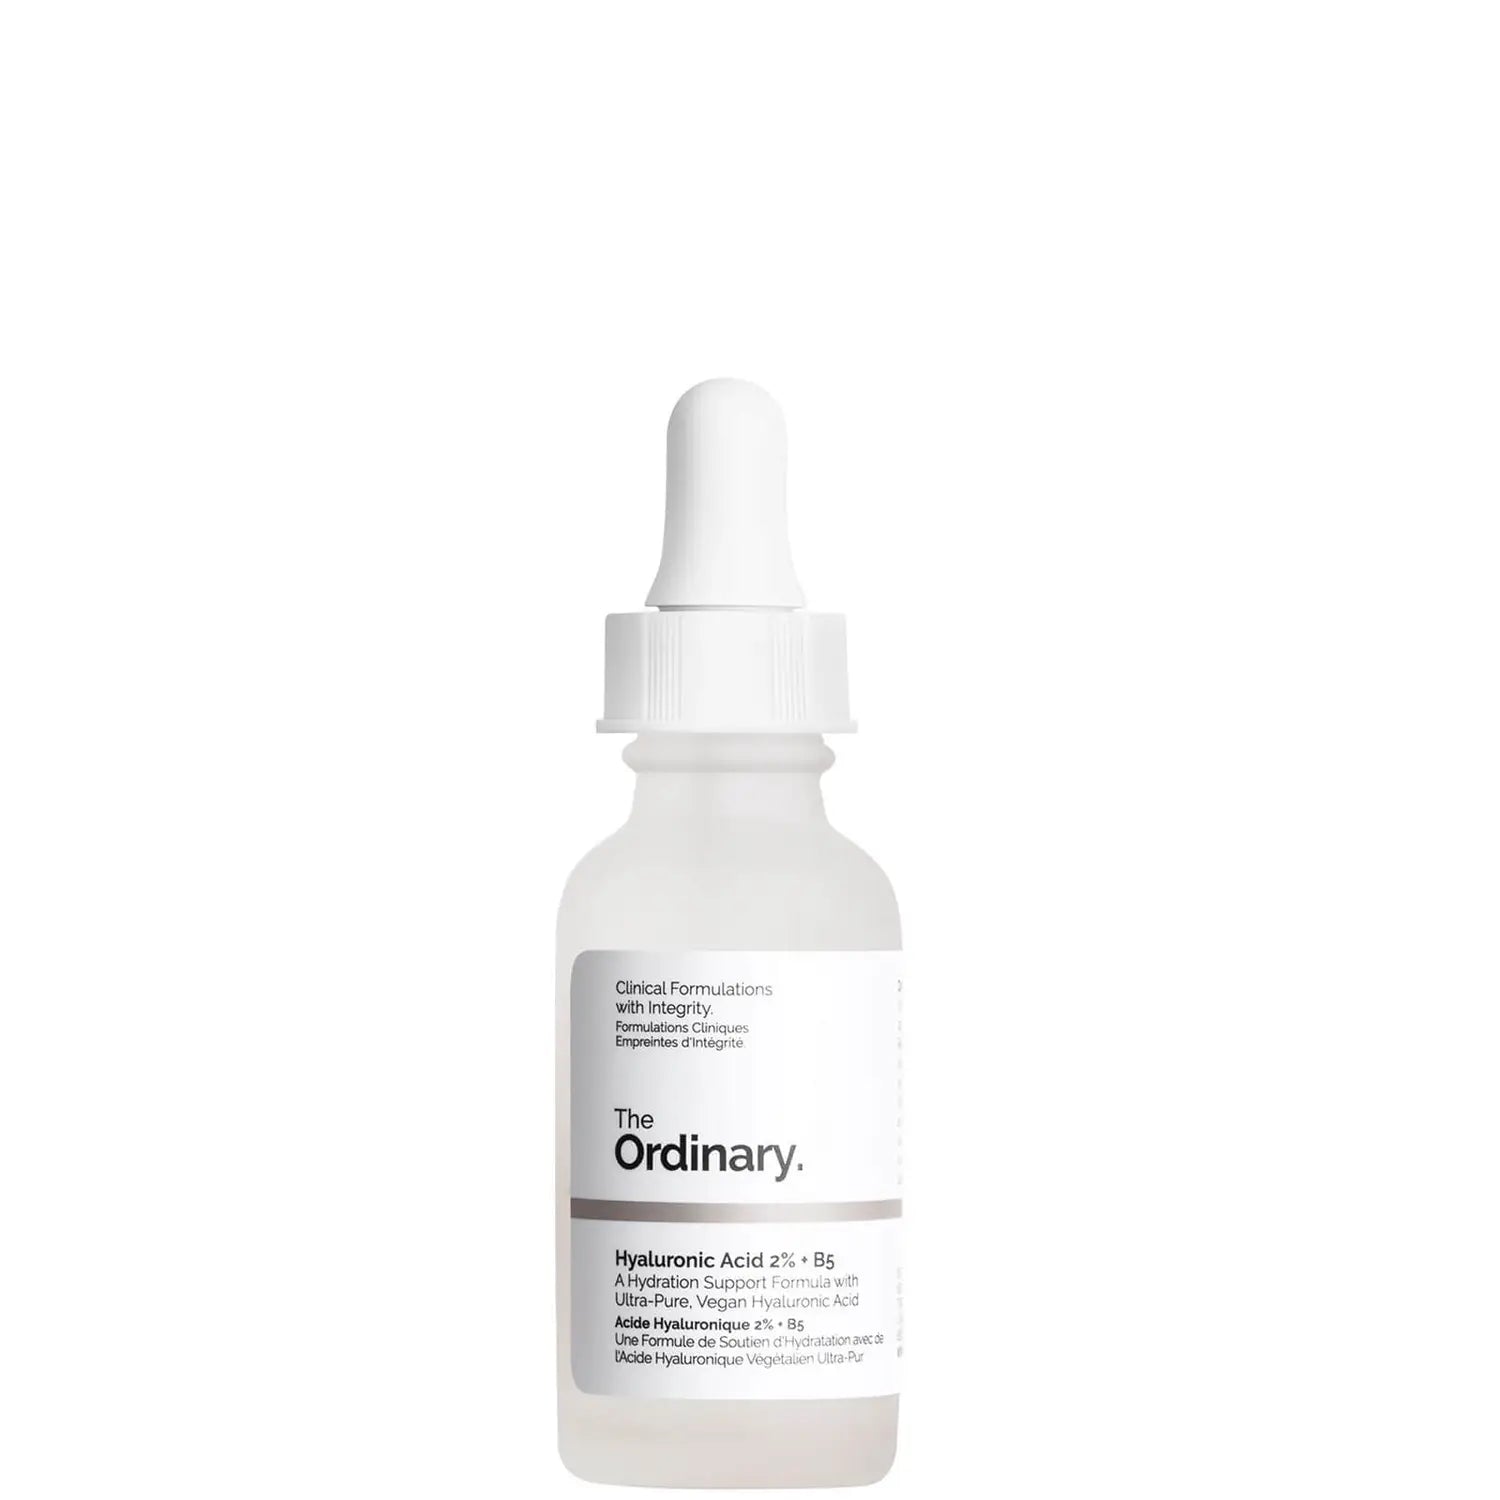  The Ordinary The Ordinary Hyaluronic Acid 2% + B5 30ml